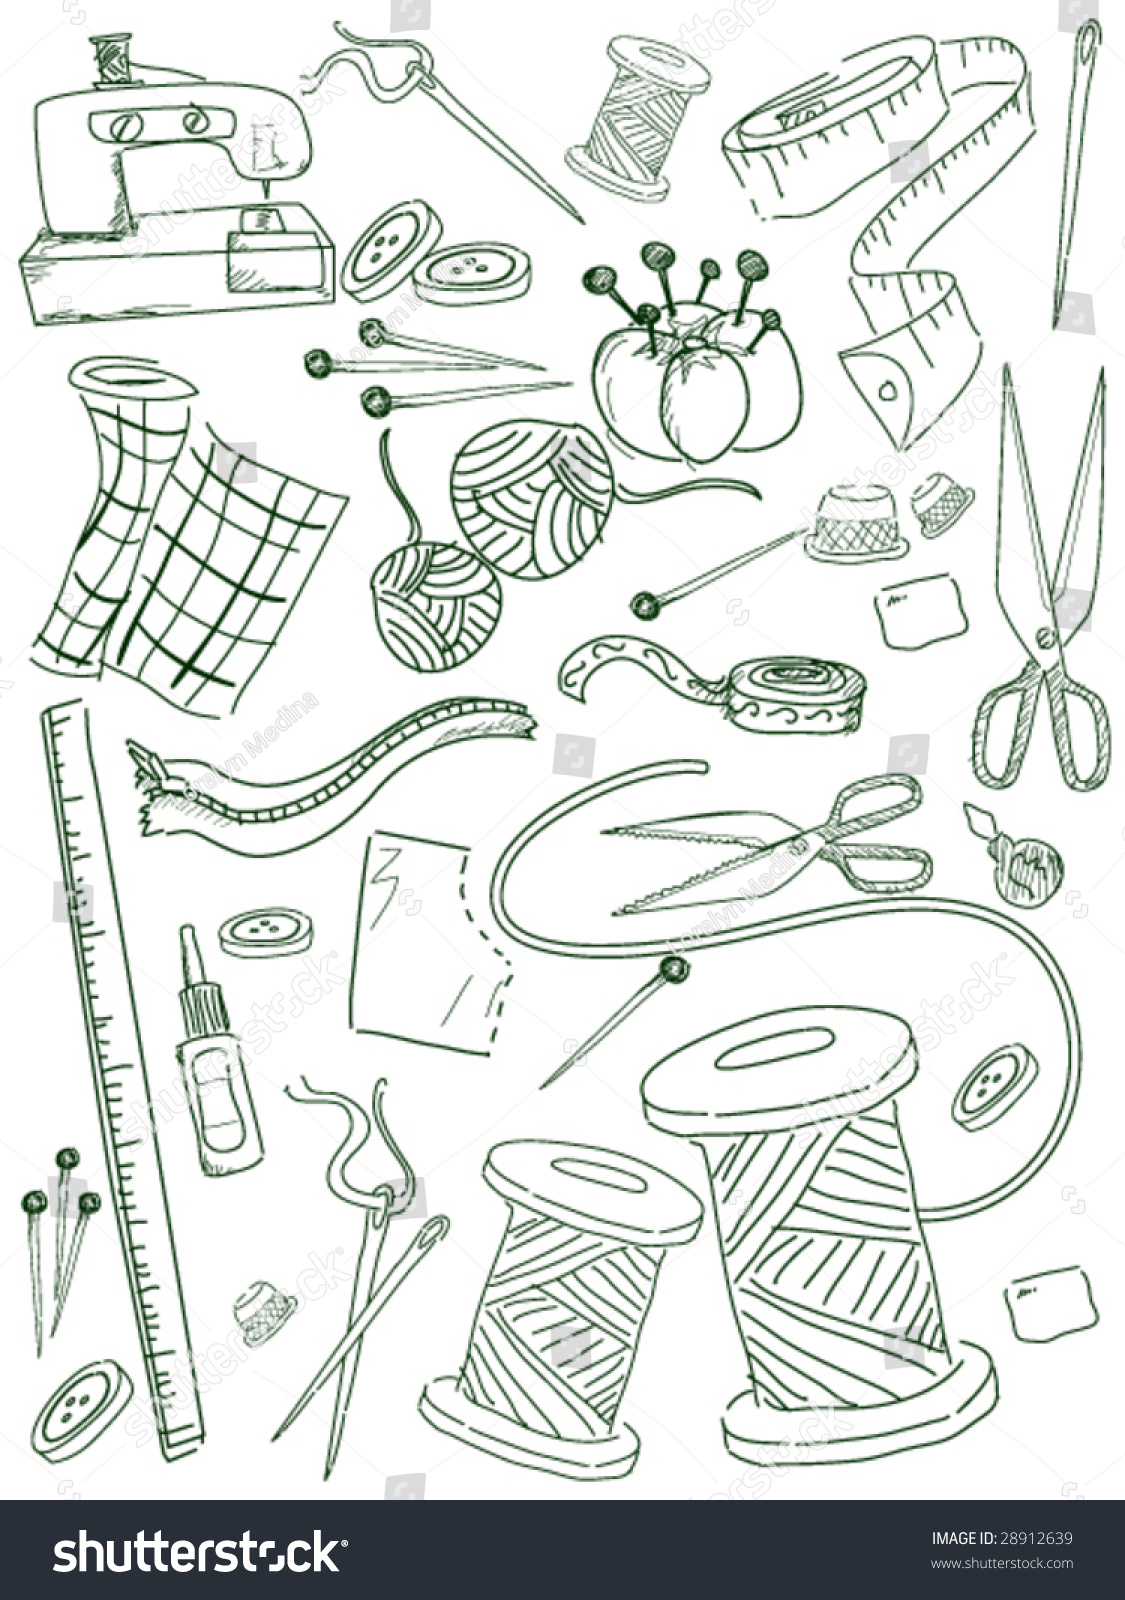 Sewing Doodles Vector Stock Vector (Royalty Free) 28912639 | Shutterstock